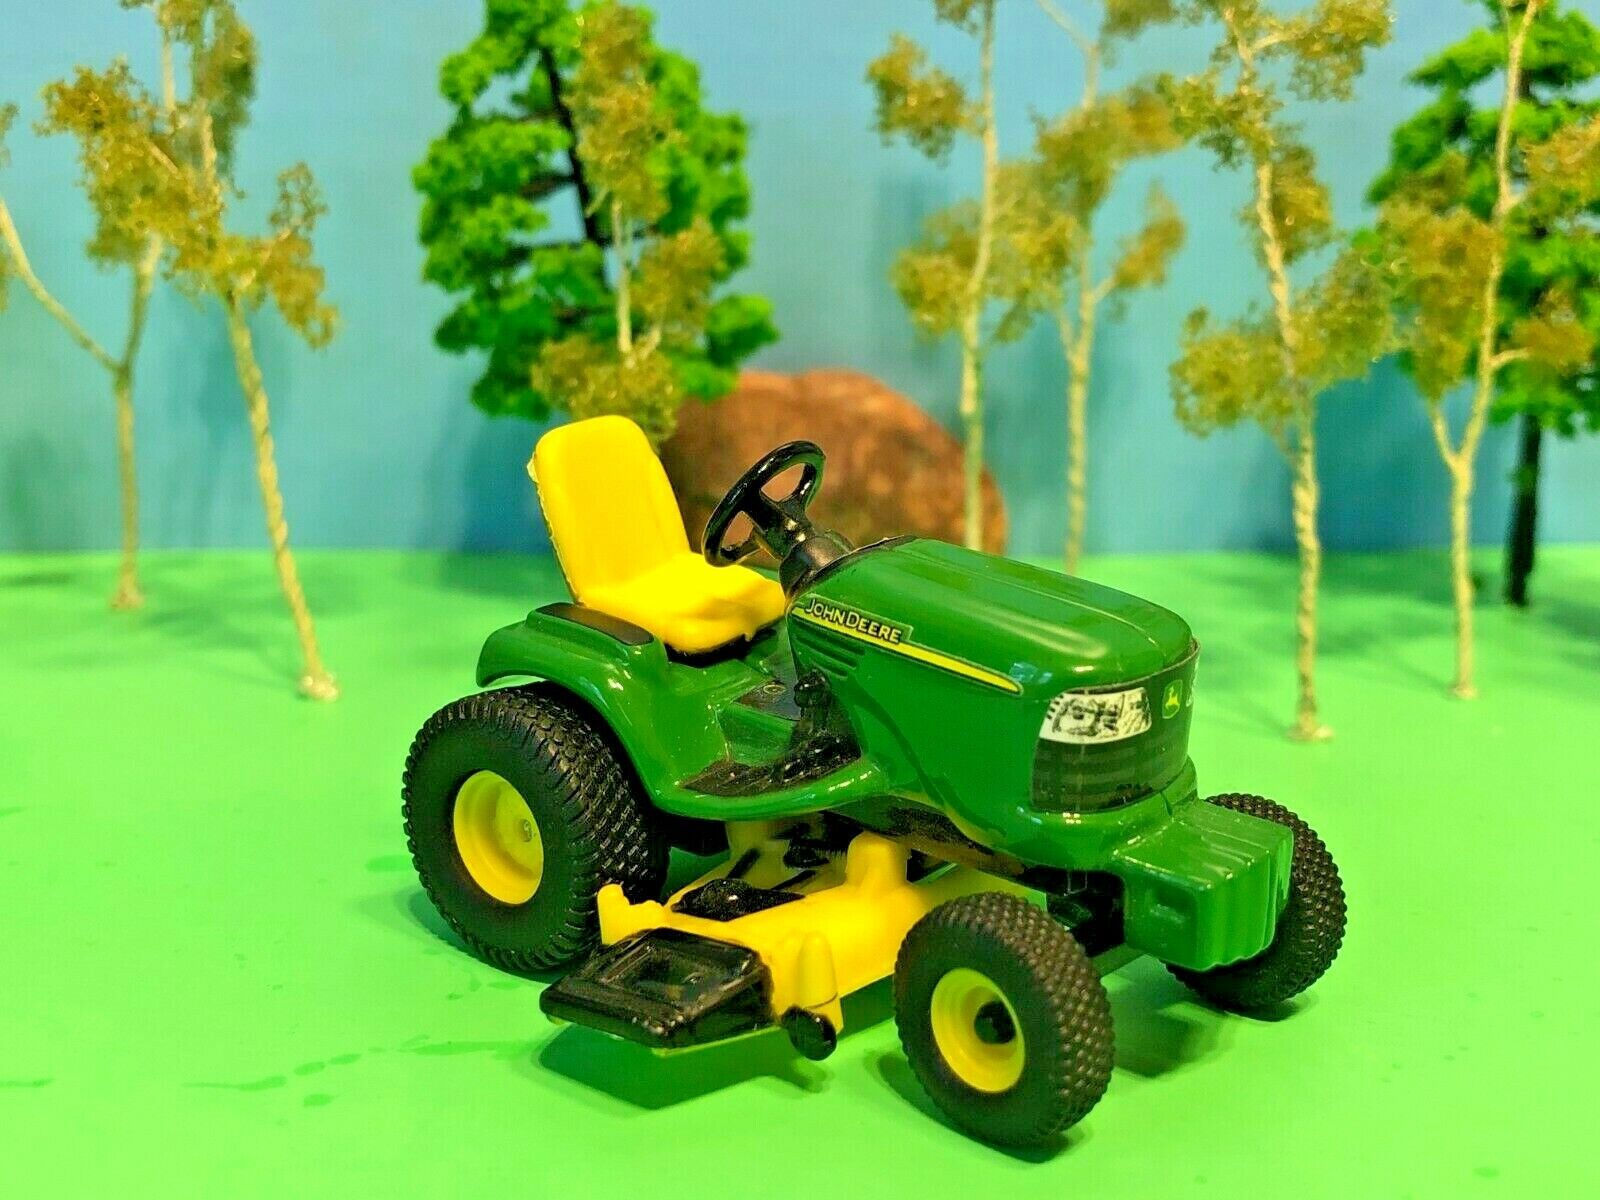 John Deere, Very Cool, Riding Tractor, With Lawn Mower Deck, ERTL Quality, 1/32